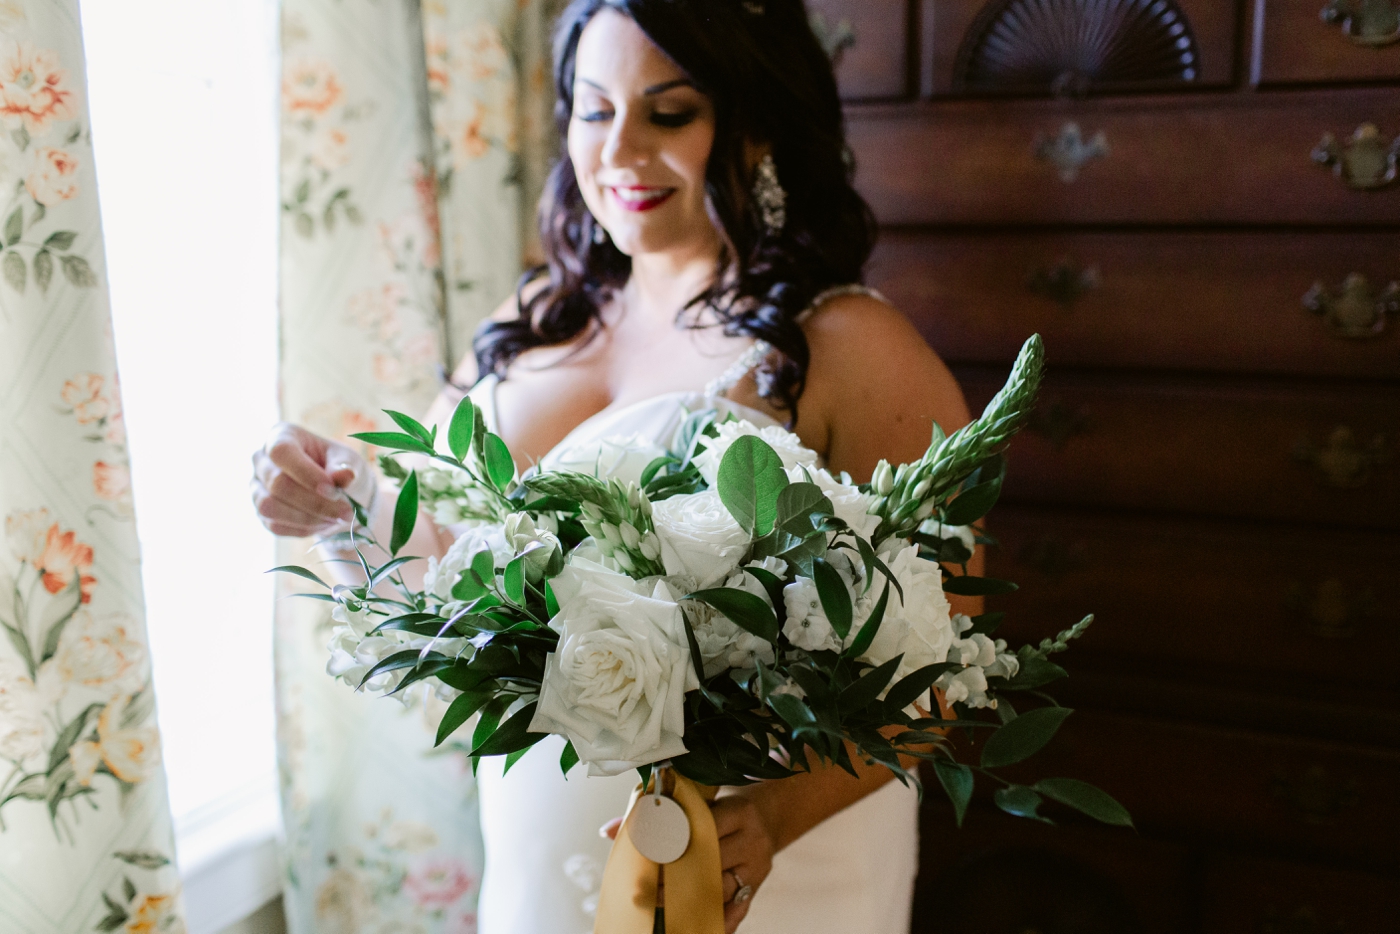 Wedding flowers by Xpressions Floral Design